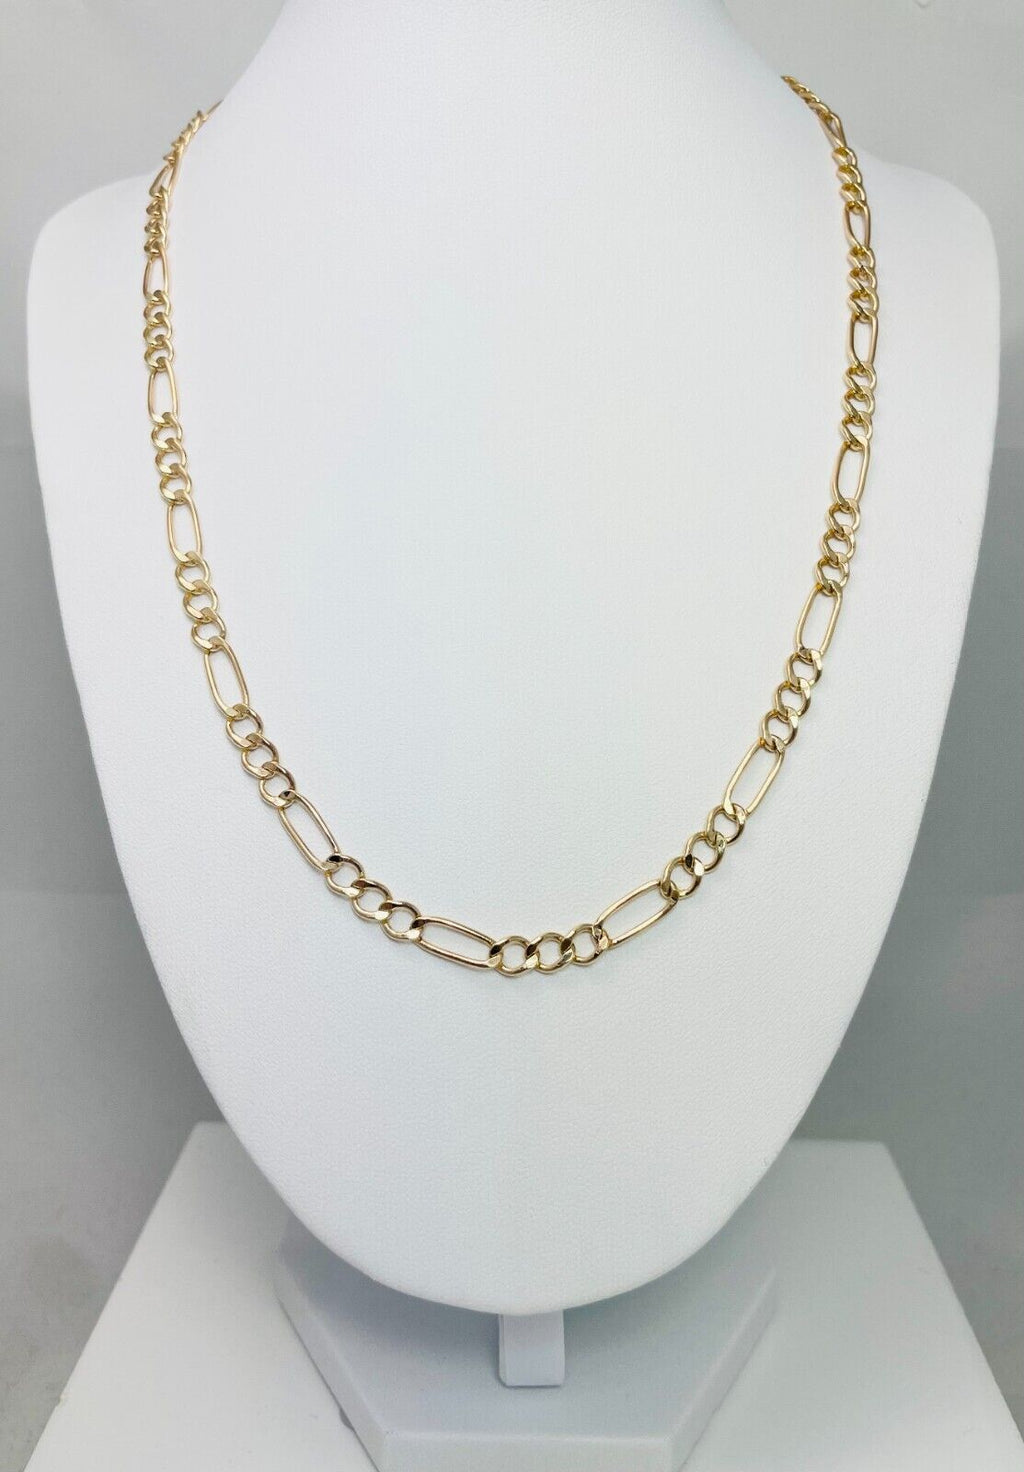 Have one to sell? Sell now 20" 14k Hollow Yellow Gold Figaro Chain Necklace Italy